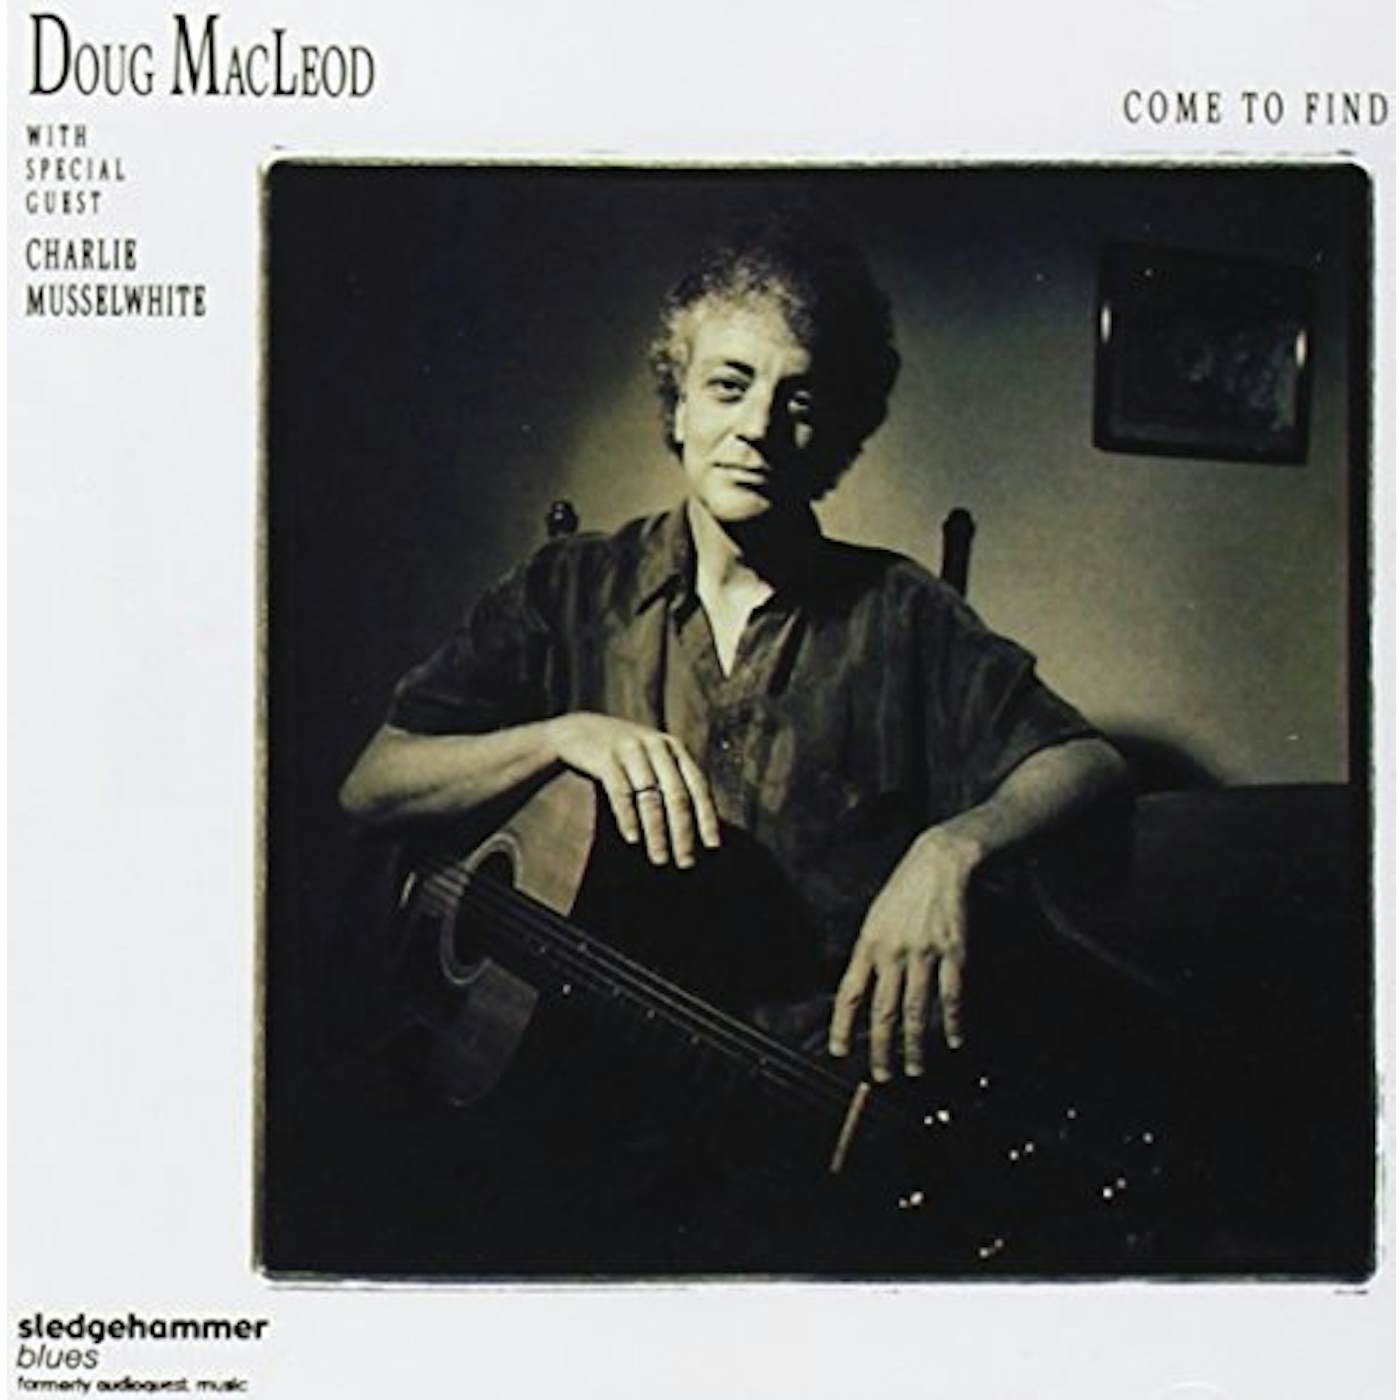 Doug MacLeod COME TO FIND CD